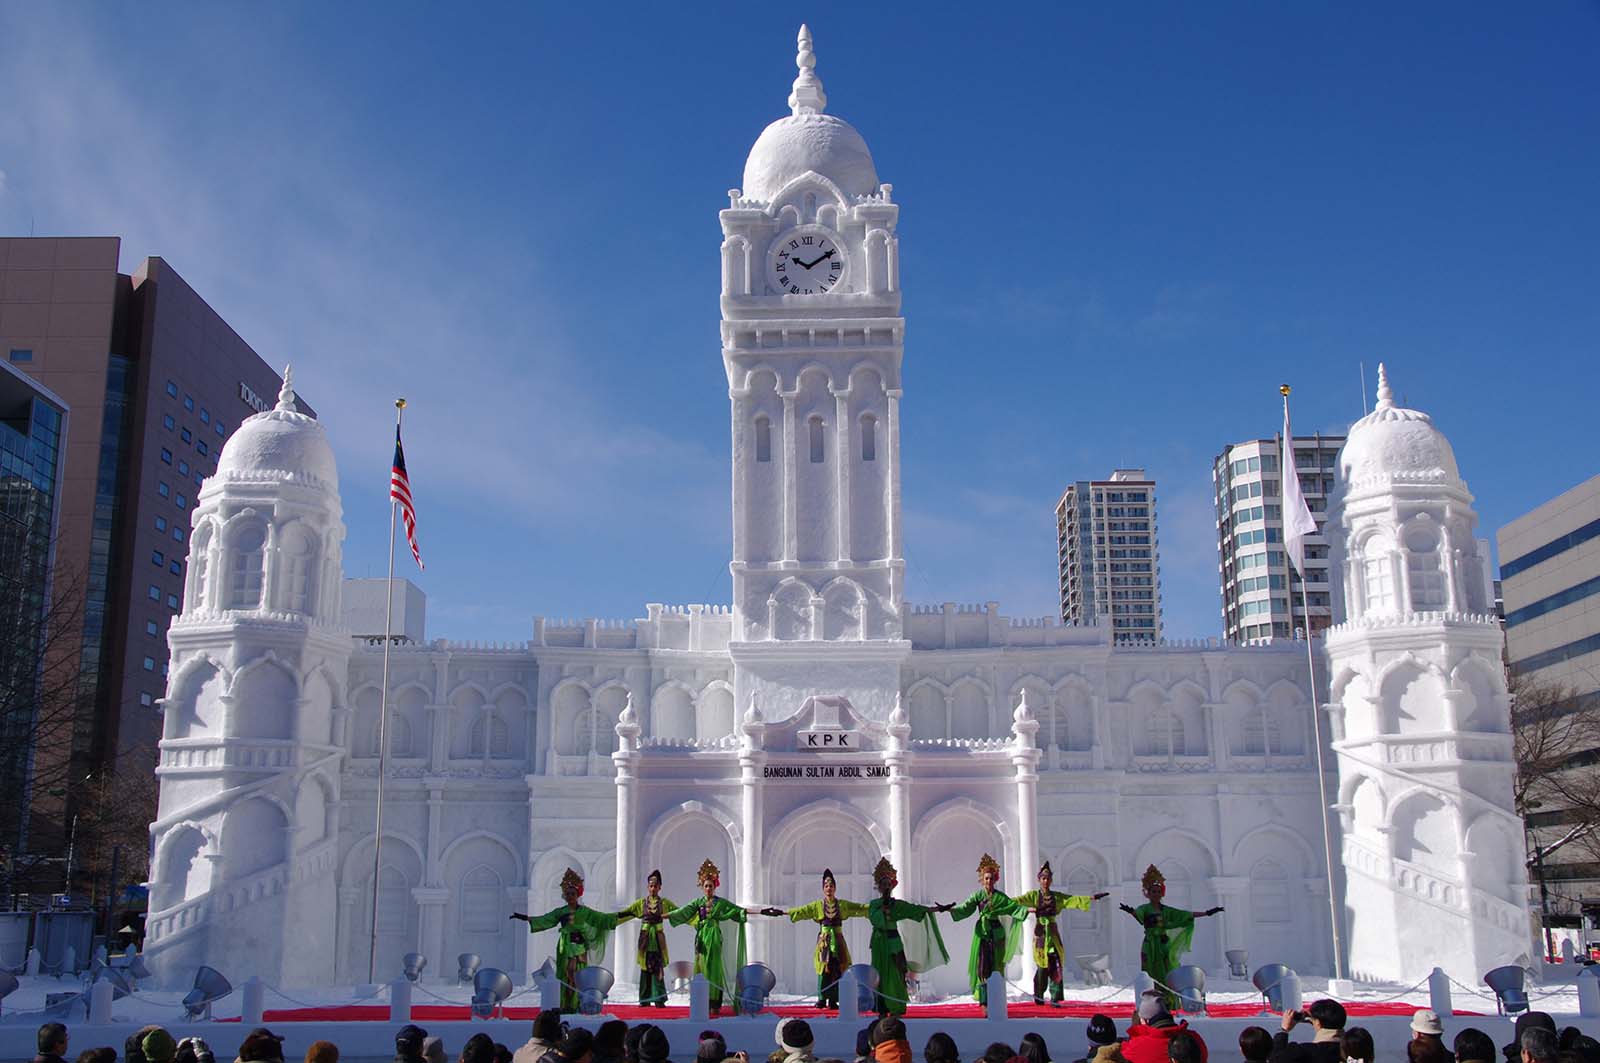 Sapporo Snow Festival is renowned for its ice sculpture replicas of famous buildings around the world like the Sultan Abdul Samad building in Kuala Lumpur | Winter in Sapporo